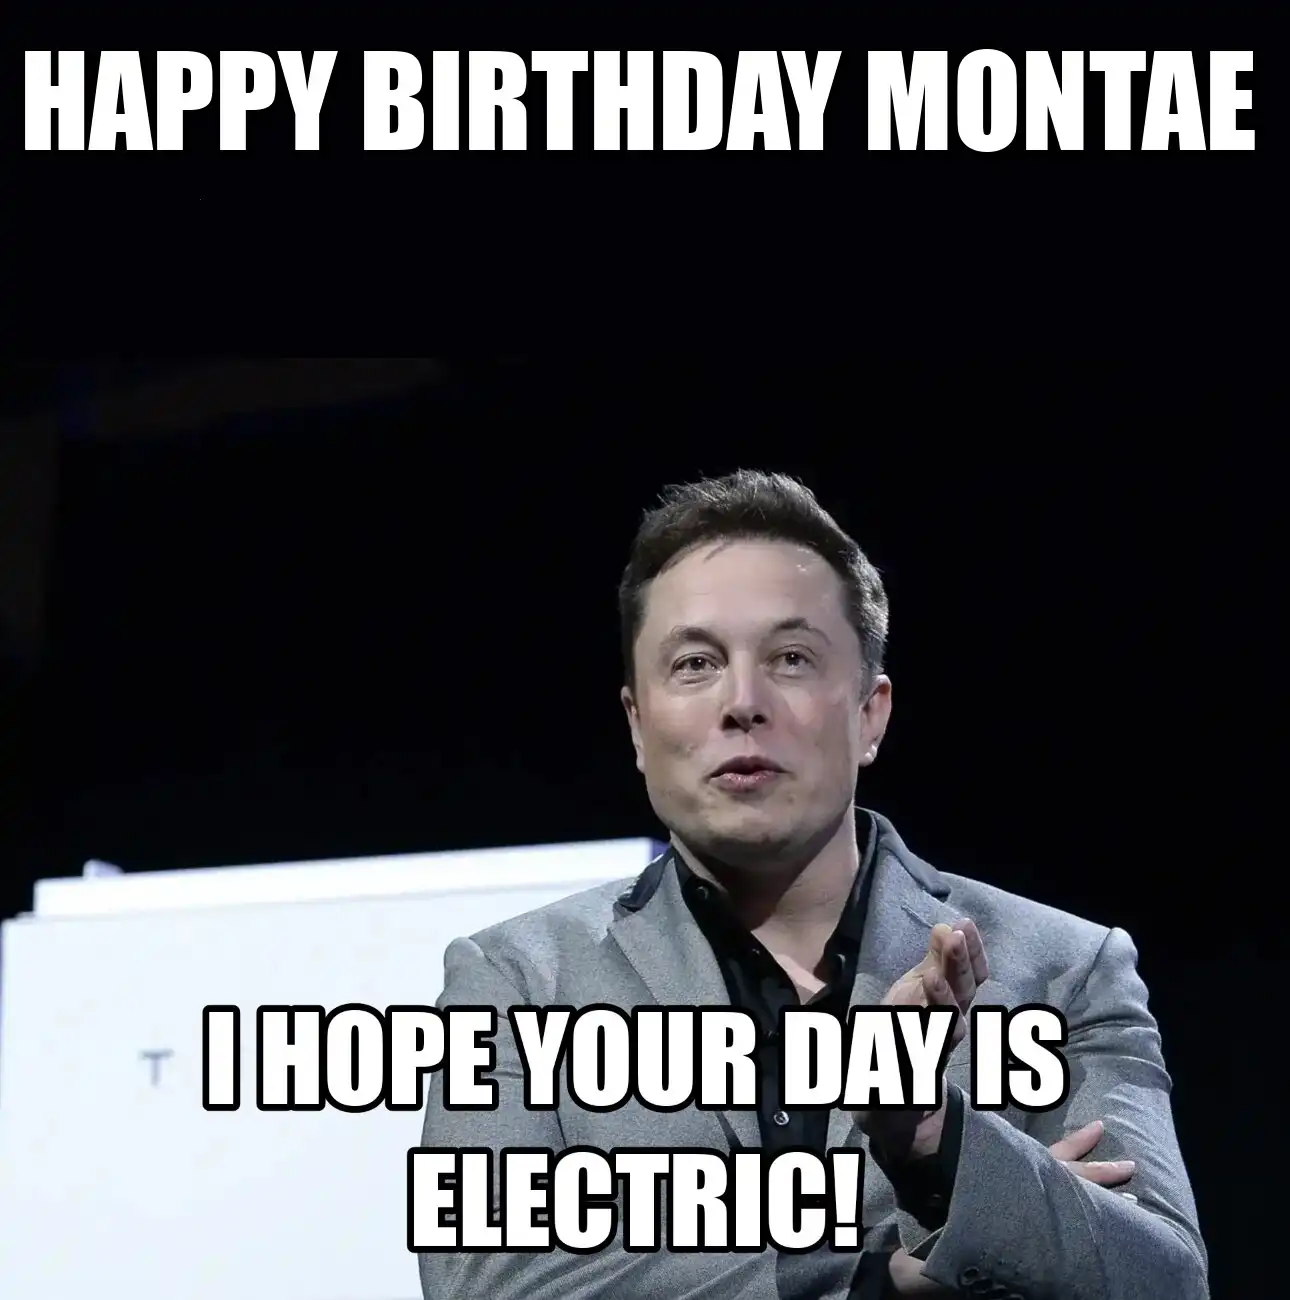 Happy Birthday Montae I Hope Your Day Is Electric Meme